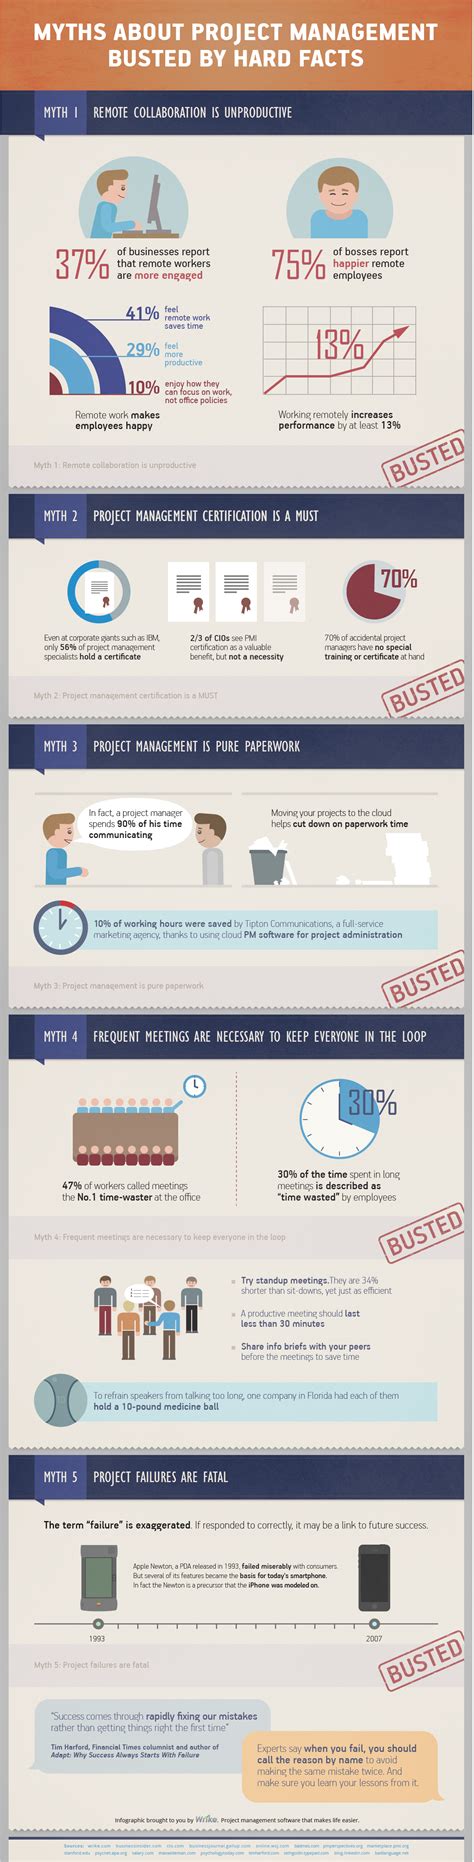 Top 5 Project Management Myths Busted Infographic